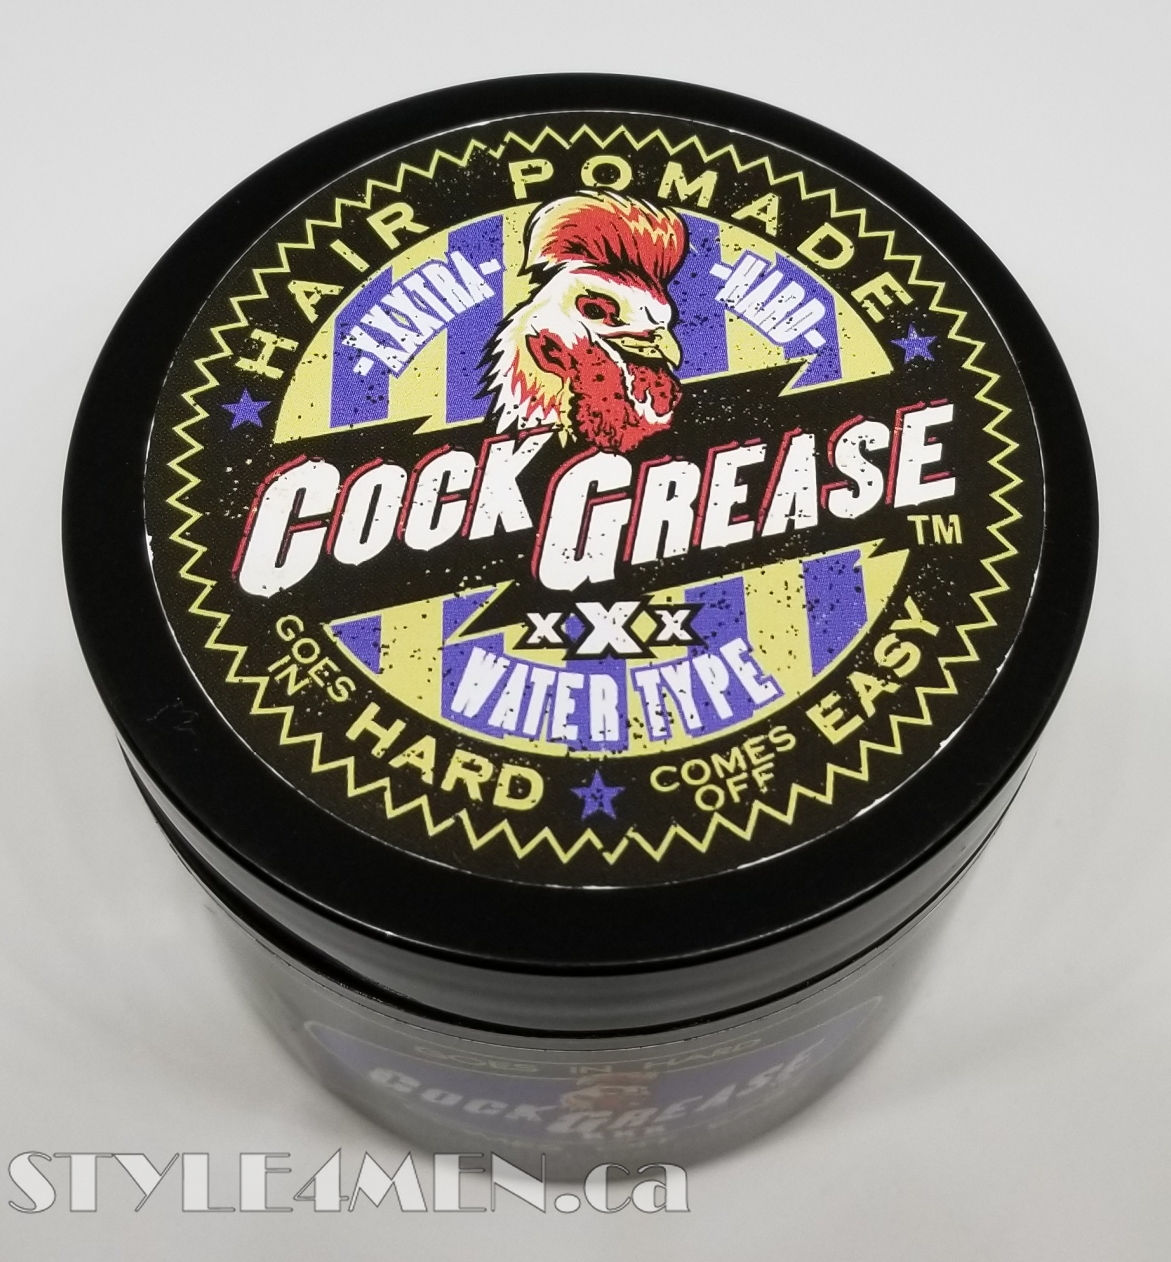 Cock Grease – Water Type